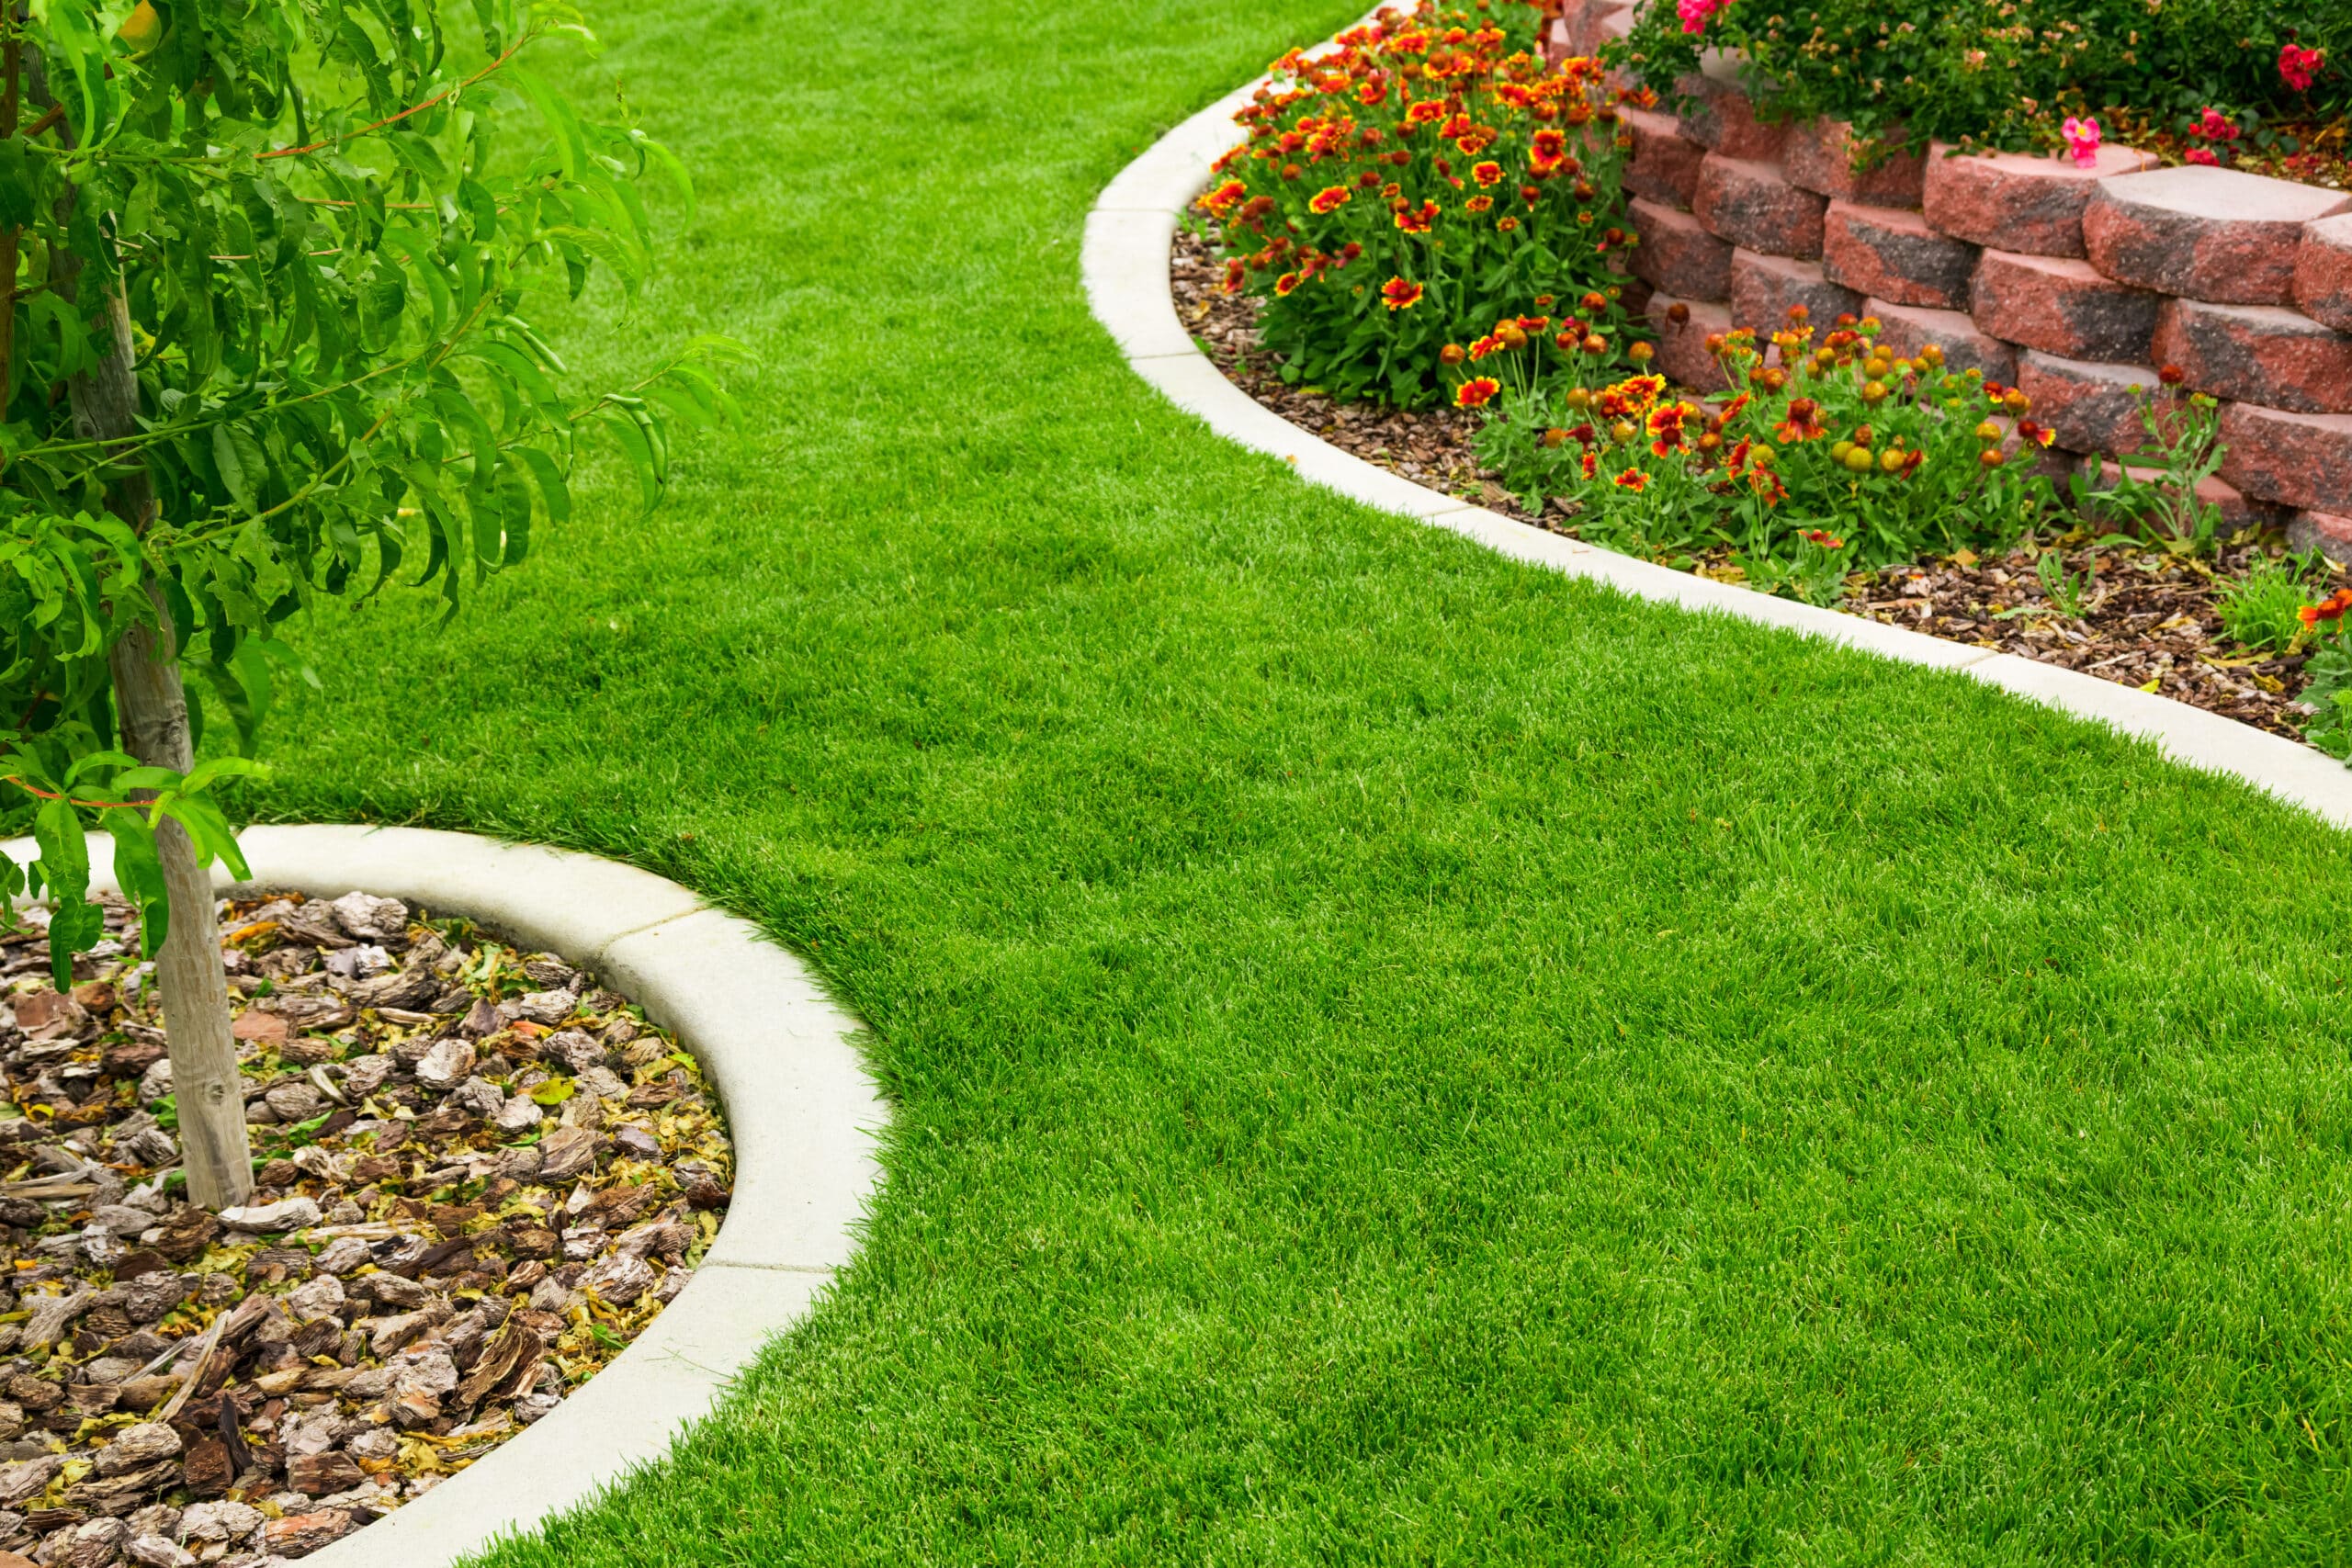 sod installation brings instant aesthetic appeal